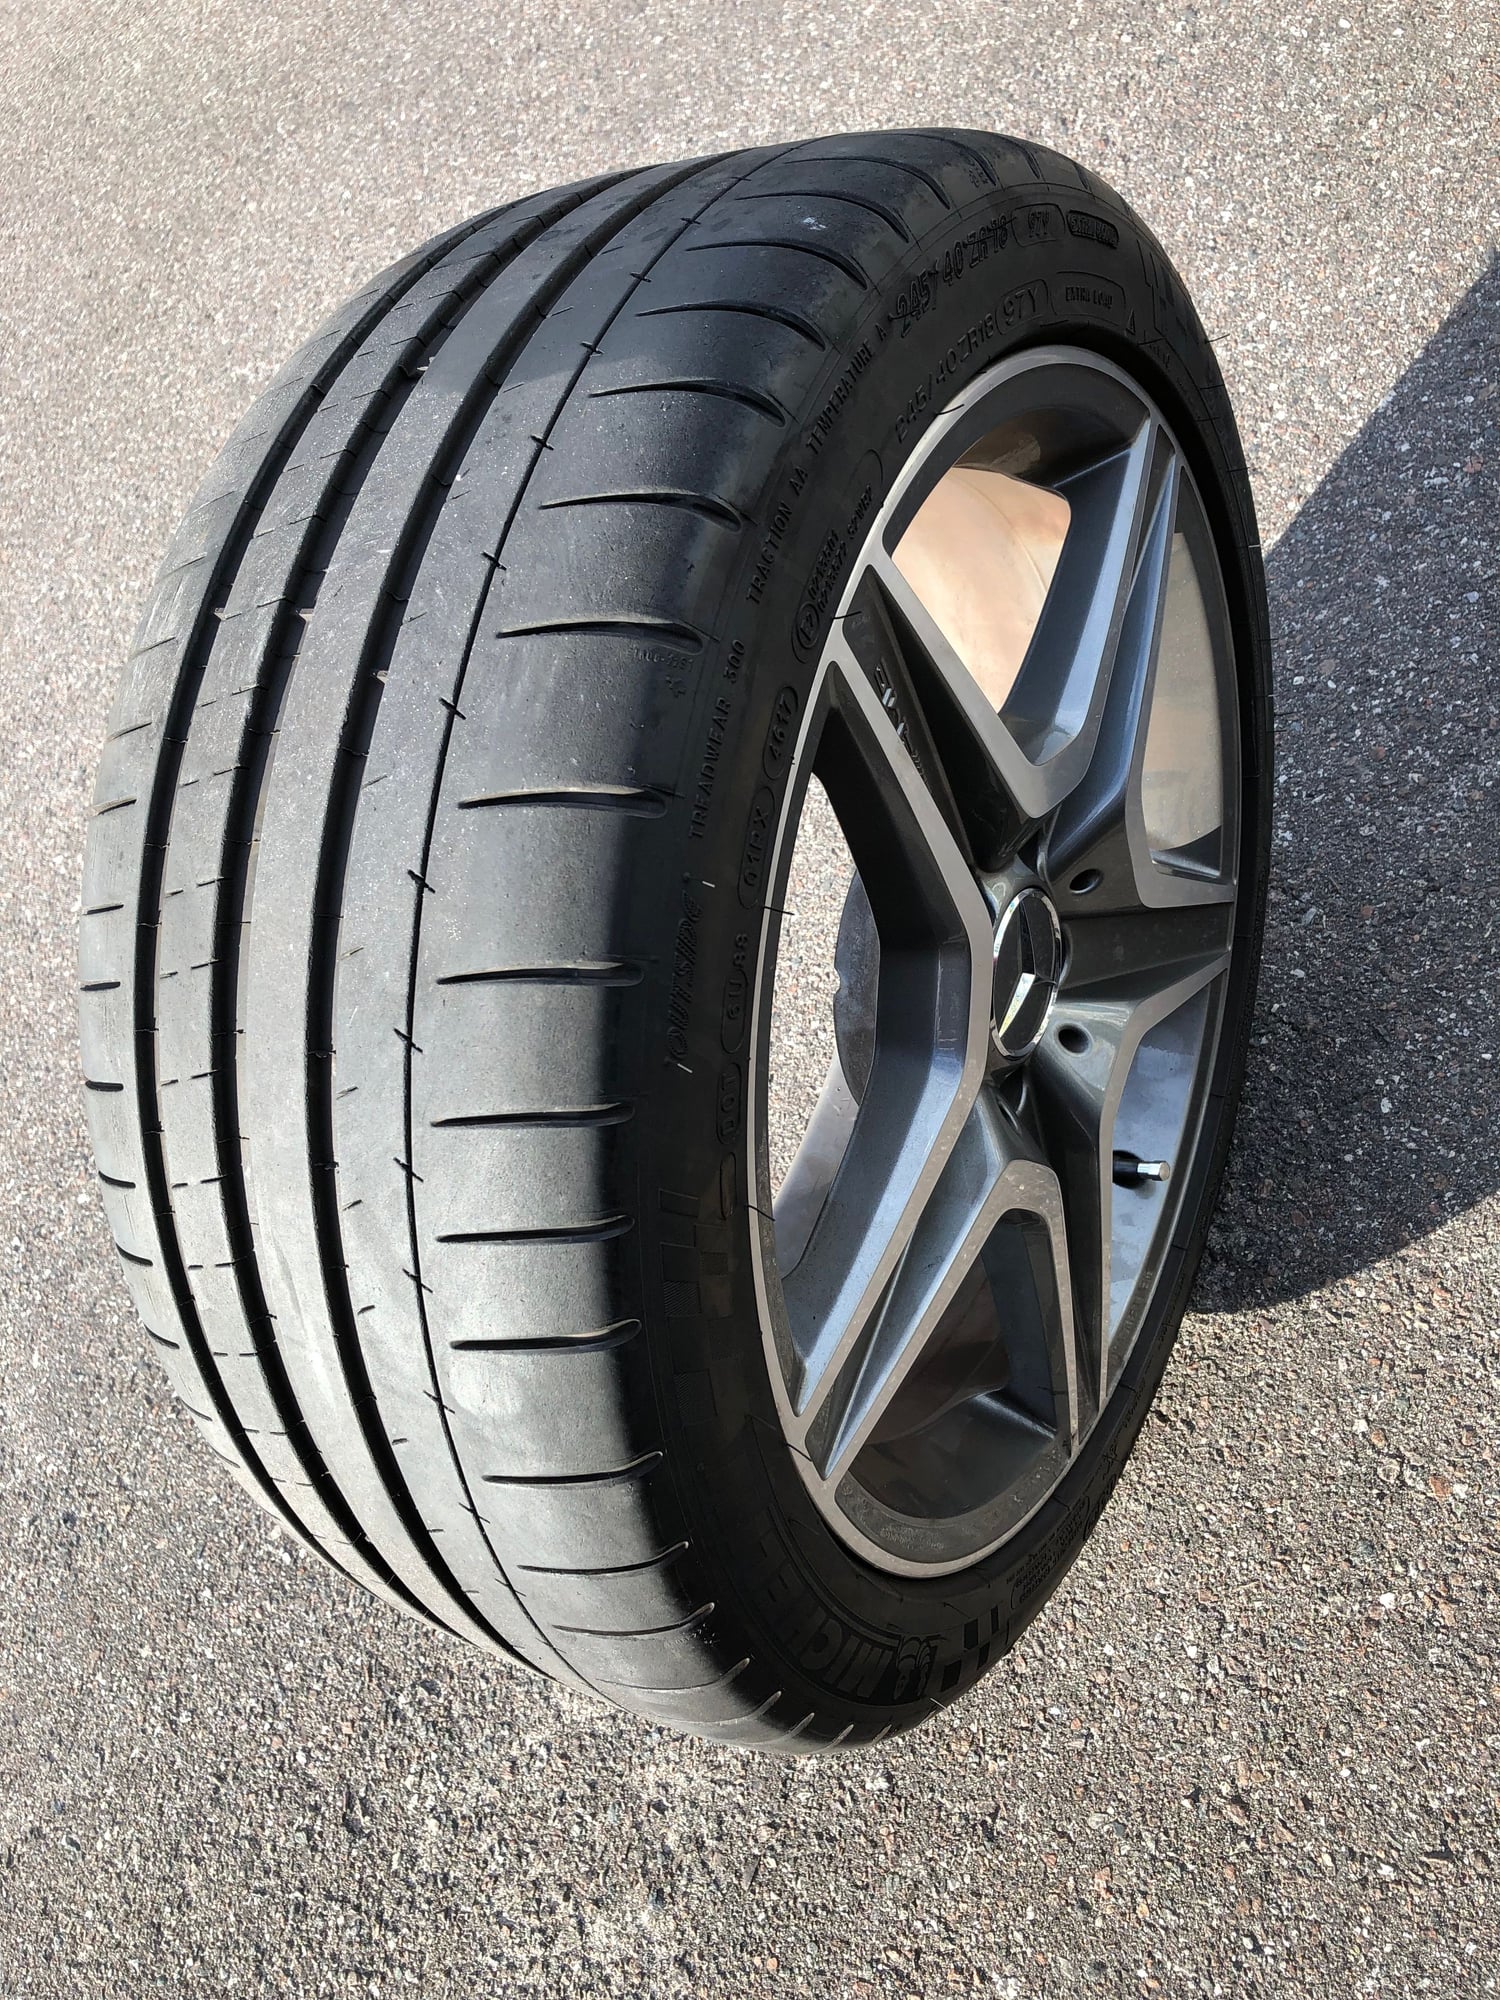 Wheels and Tires/Axles - OEM 18" C63 Wheels for sale - Used - 2008 to 2015 Mercedes-Benz C63 AMG - Altamonte Springs, FL 32714, United States